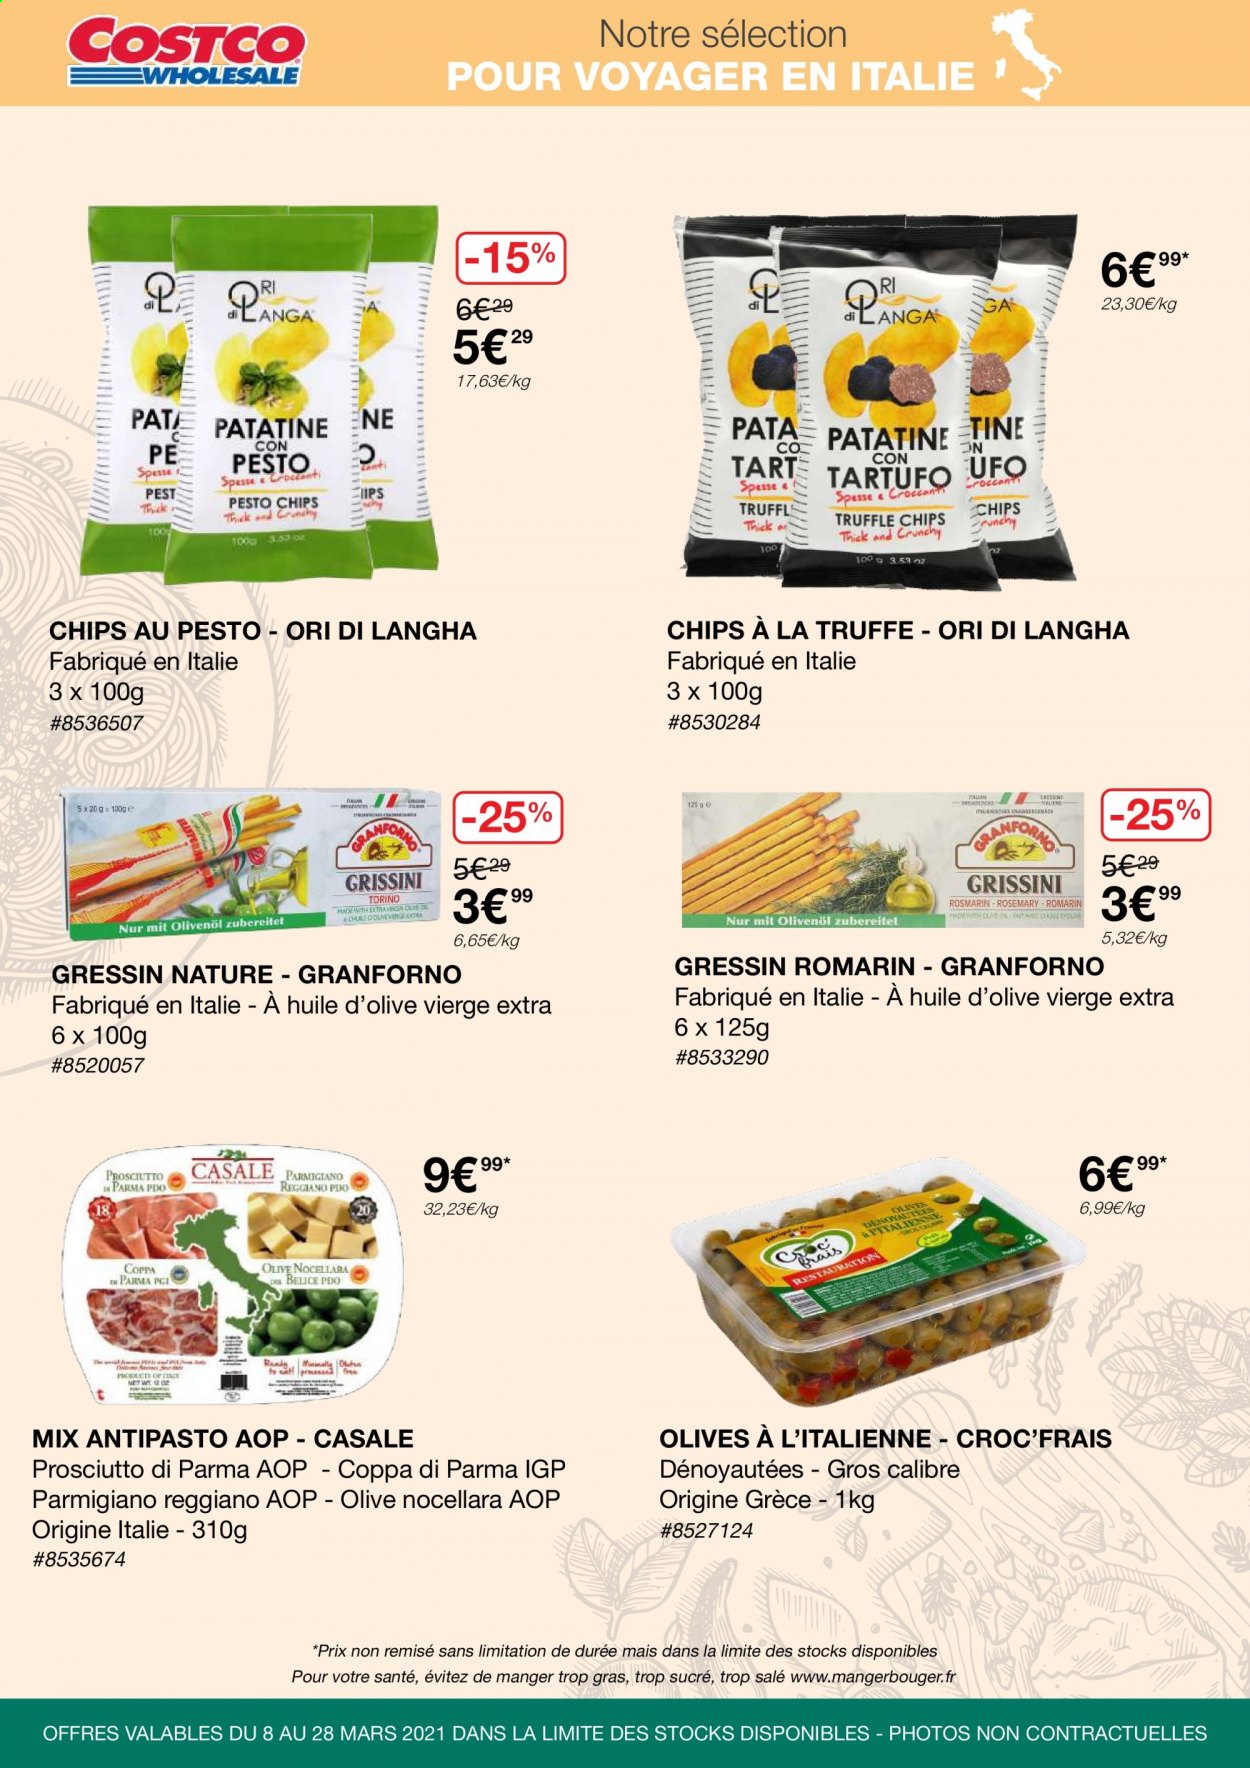 thumbnail - Catalogue Costco - 08/03/2021 - 28/03/2021 - Produits soldés - coppa, prosciutto, parmesan, chips, romarin, huile d'olive vierge extra, huile d'olive. Page 1.